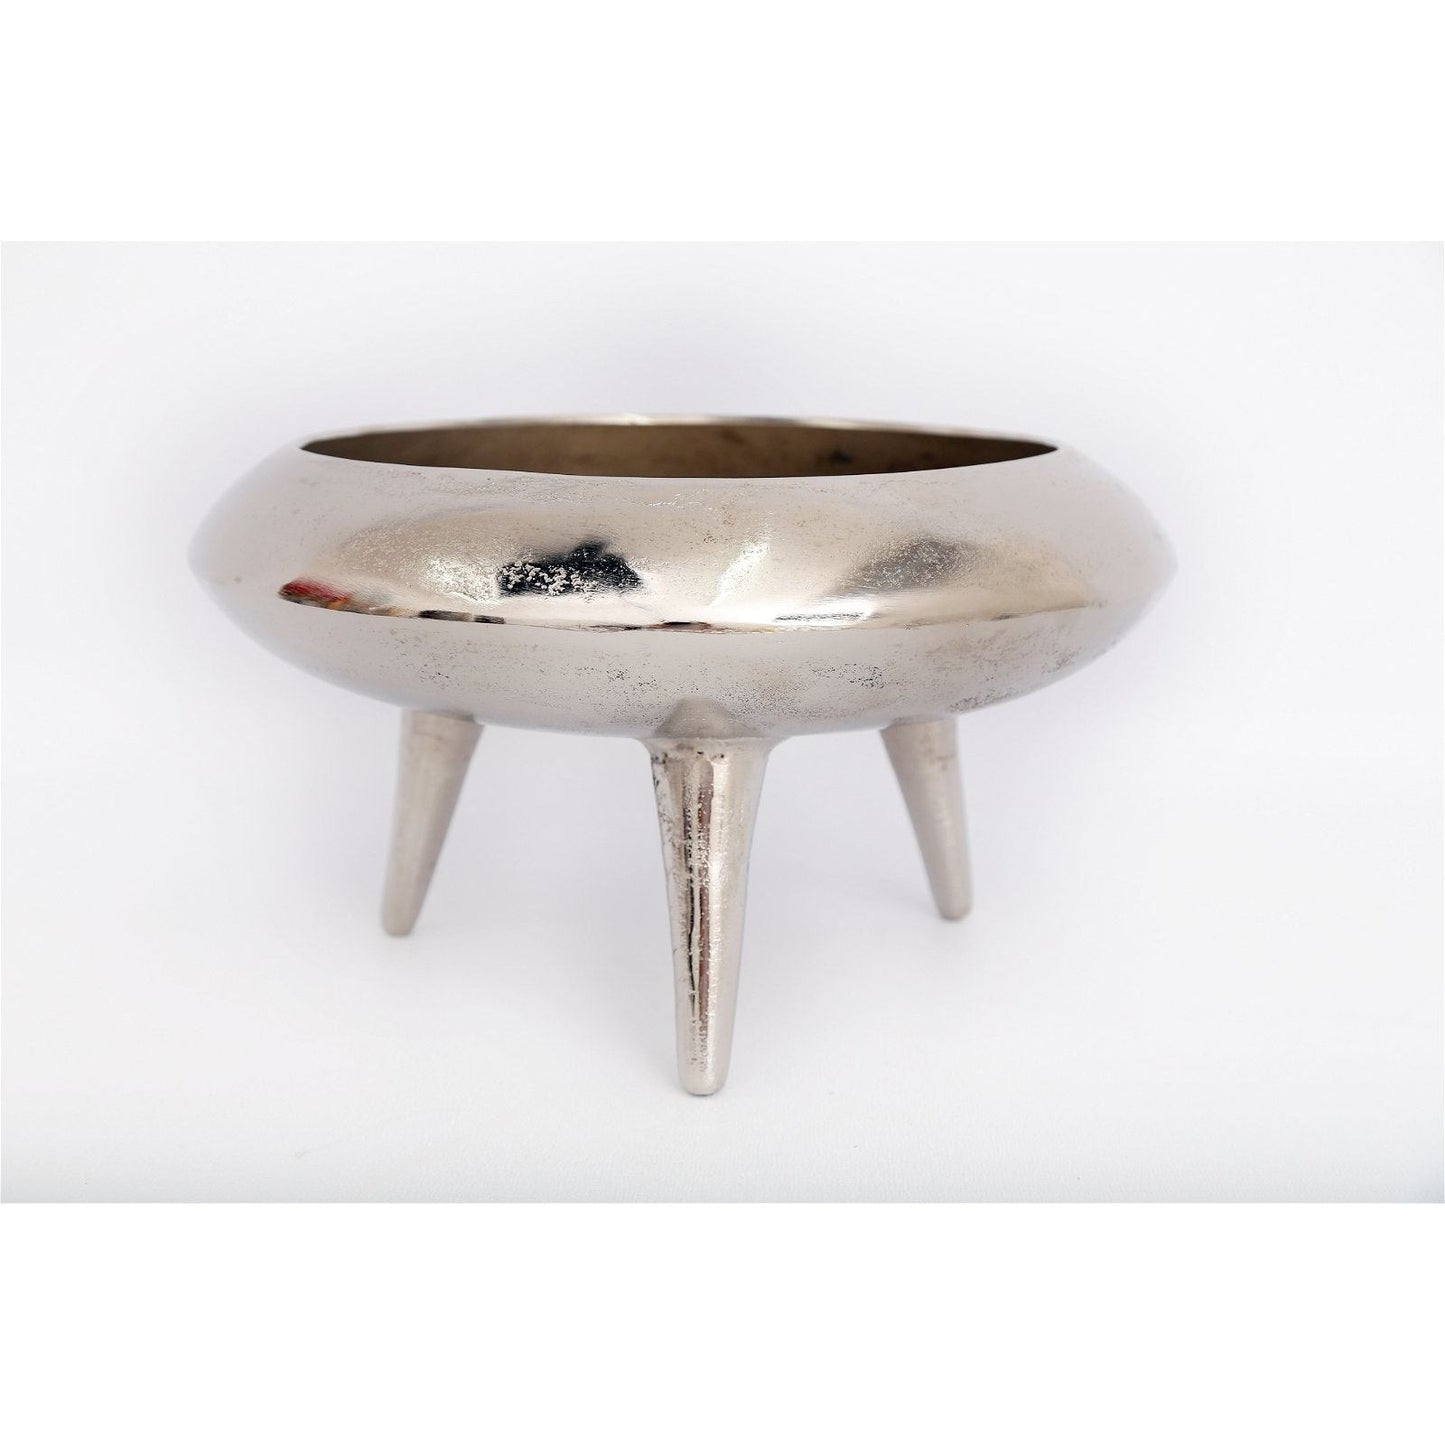 Silver Metal Planter/Bowl With Feet 39cm - Ashton and Finch